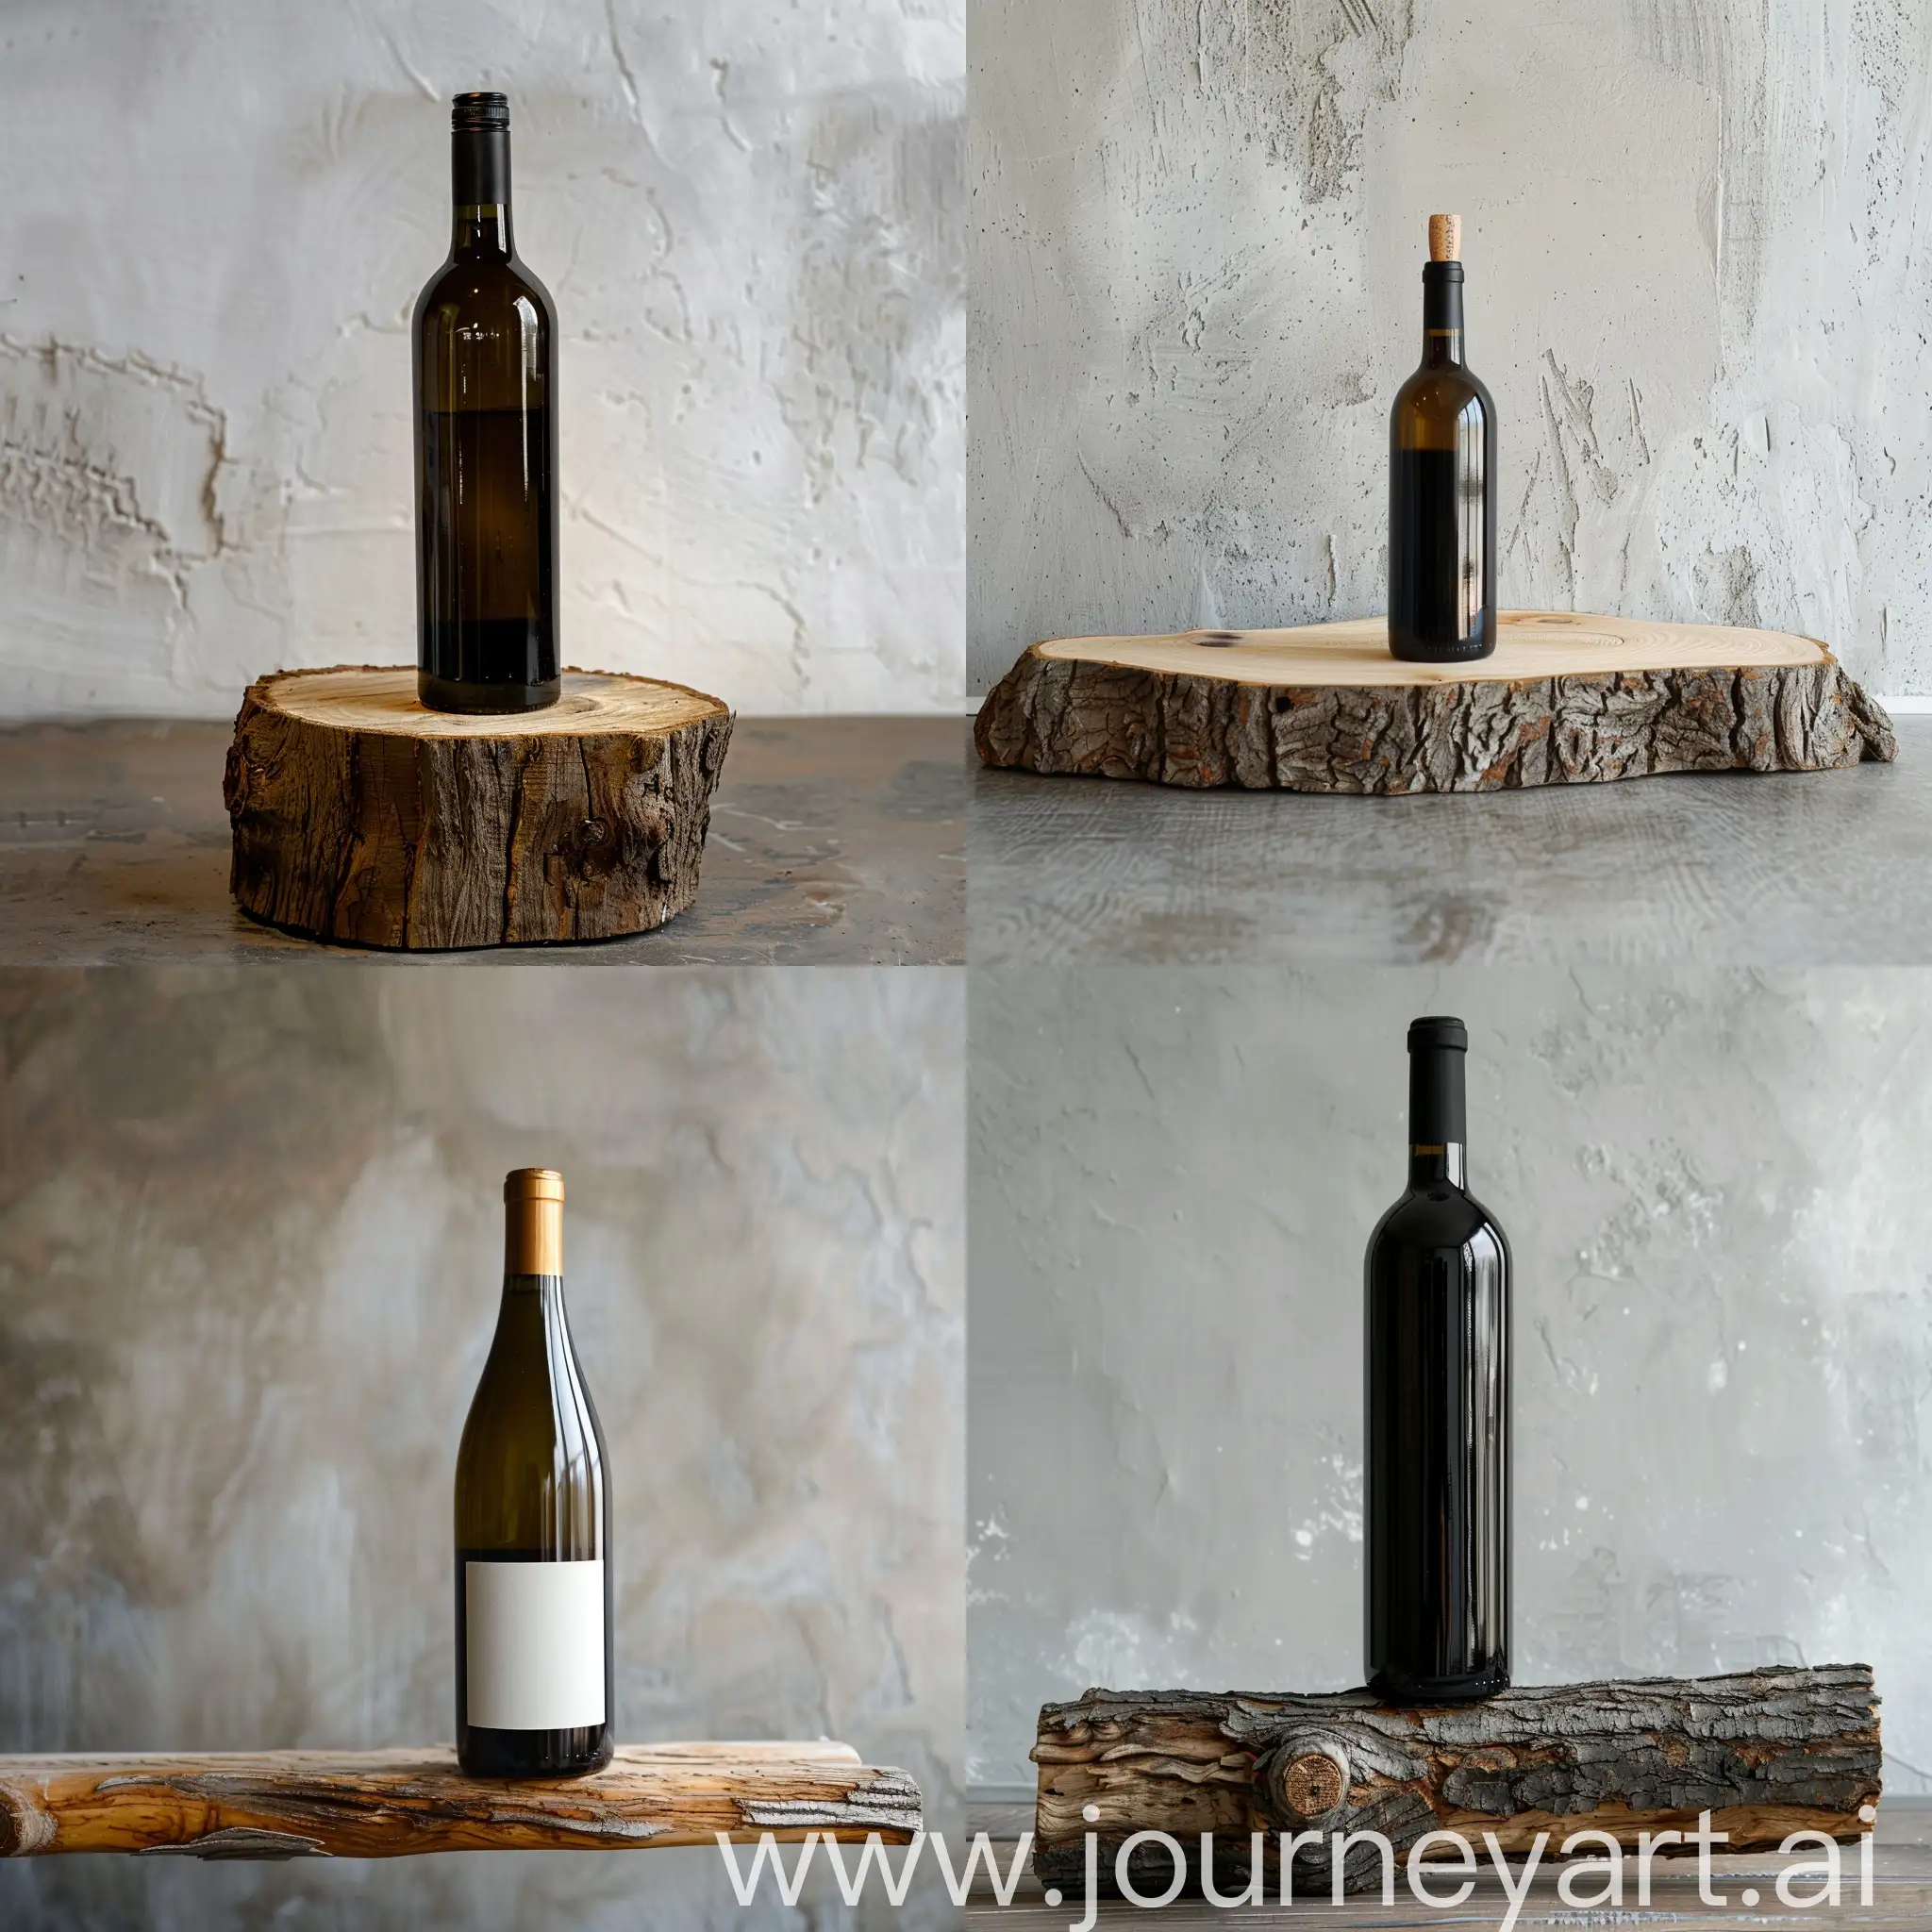 Bottle-of-Wine-Resting-on-Wooden-Surface-Against-Plain-Wall